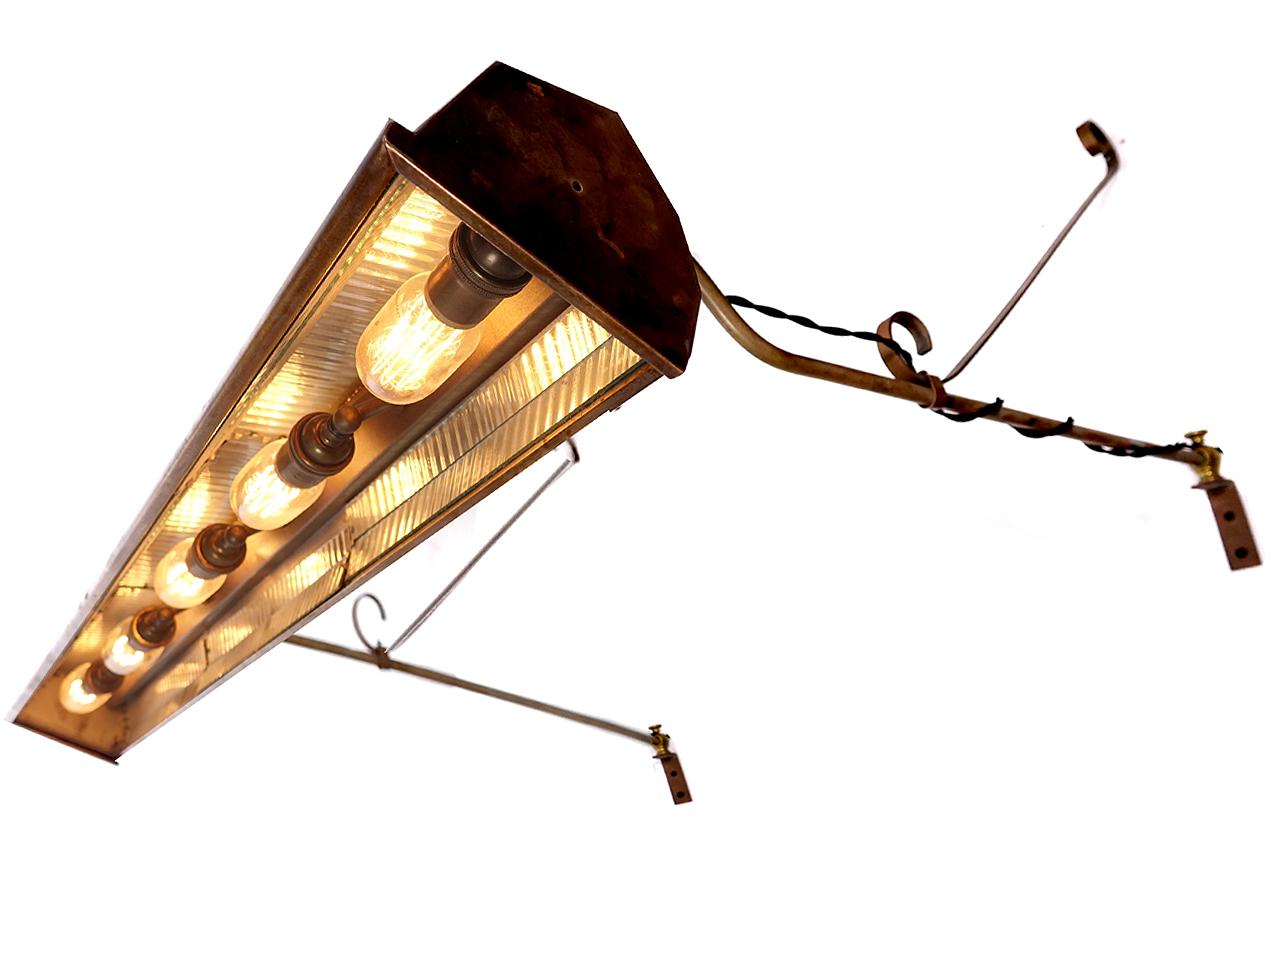 This is the type of early lamp that was used to light a large picture. It may also have served as to light a store sign or playhouse poster board. The lamp takes 5 bulbs, is 42 inches long and has fluted mirrored glass reflectors inside. It hangs